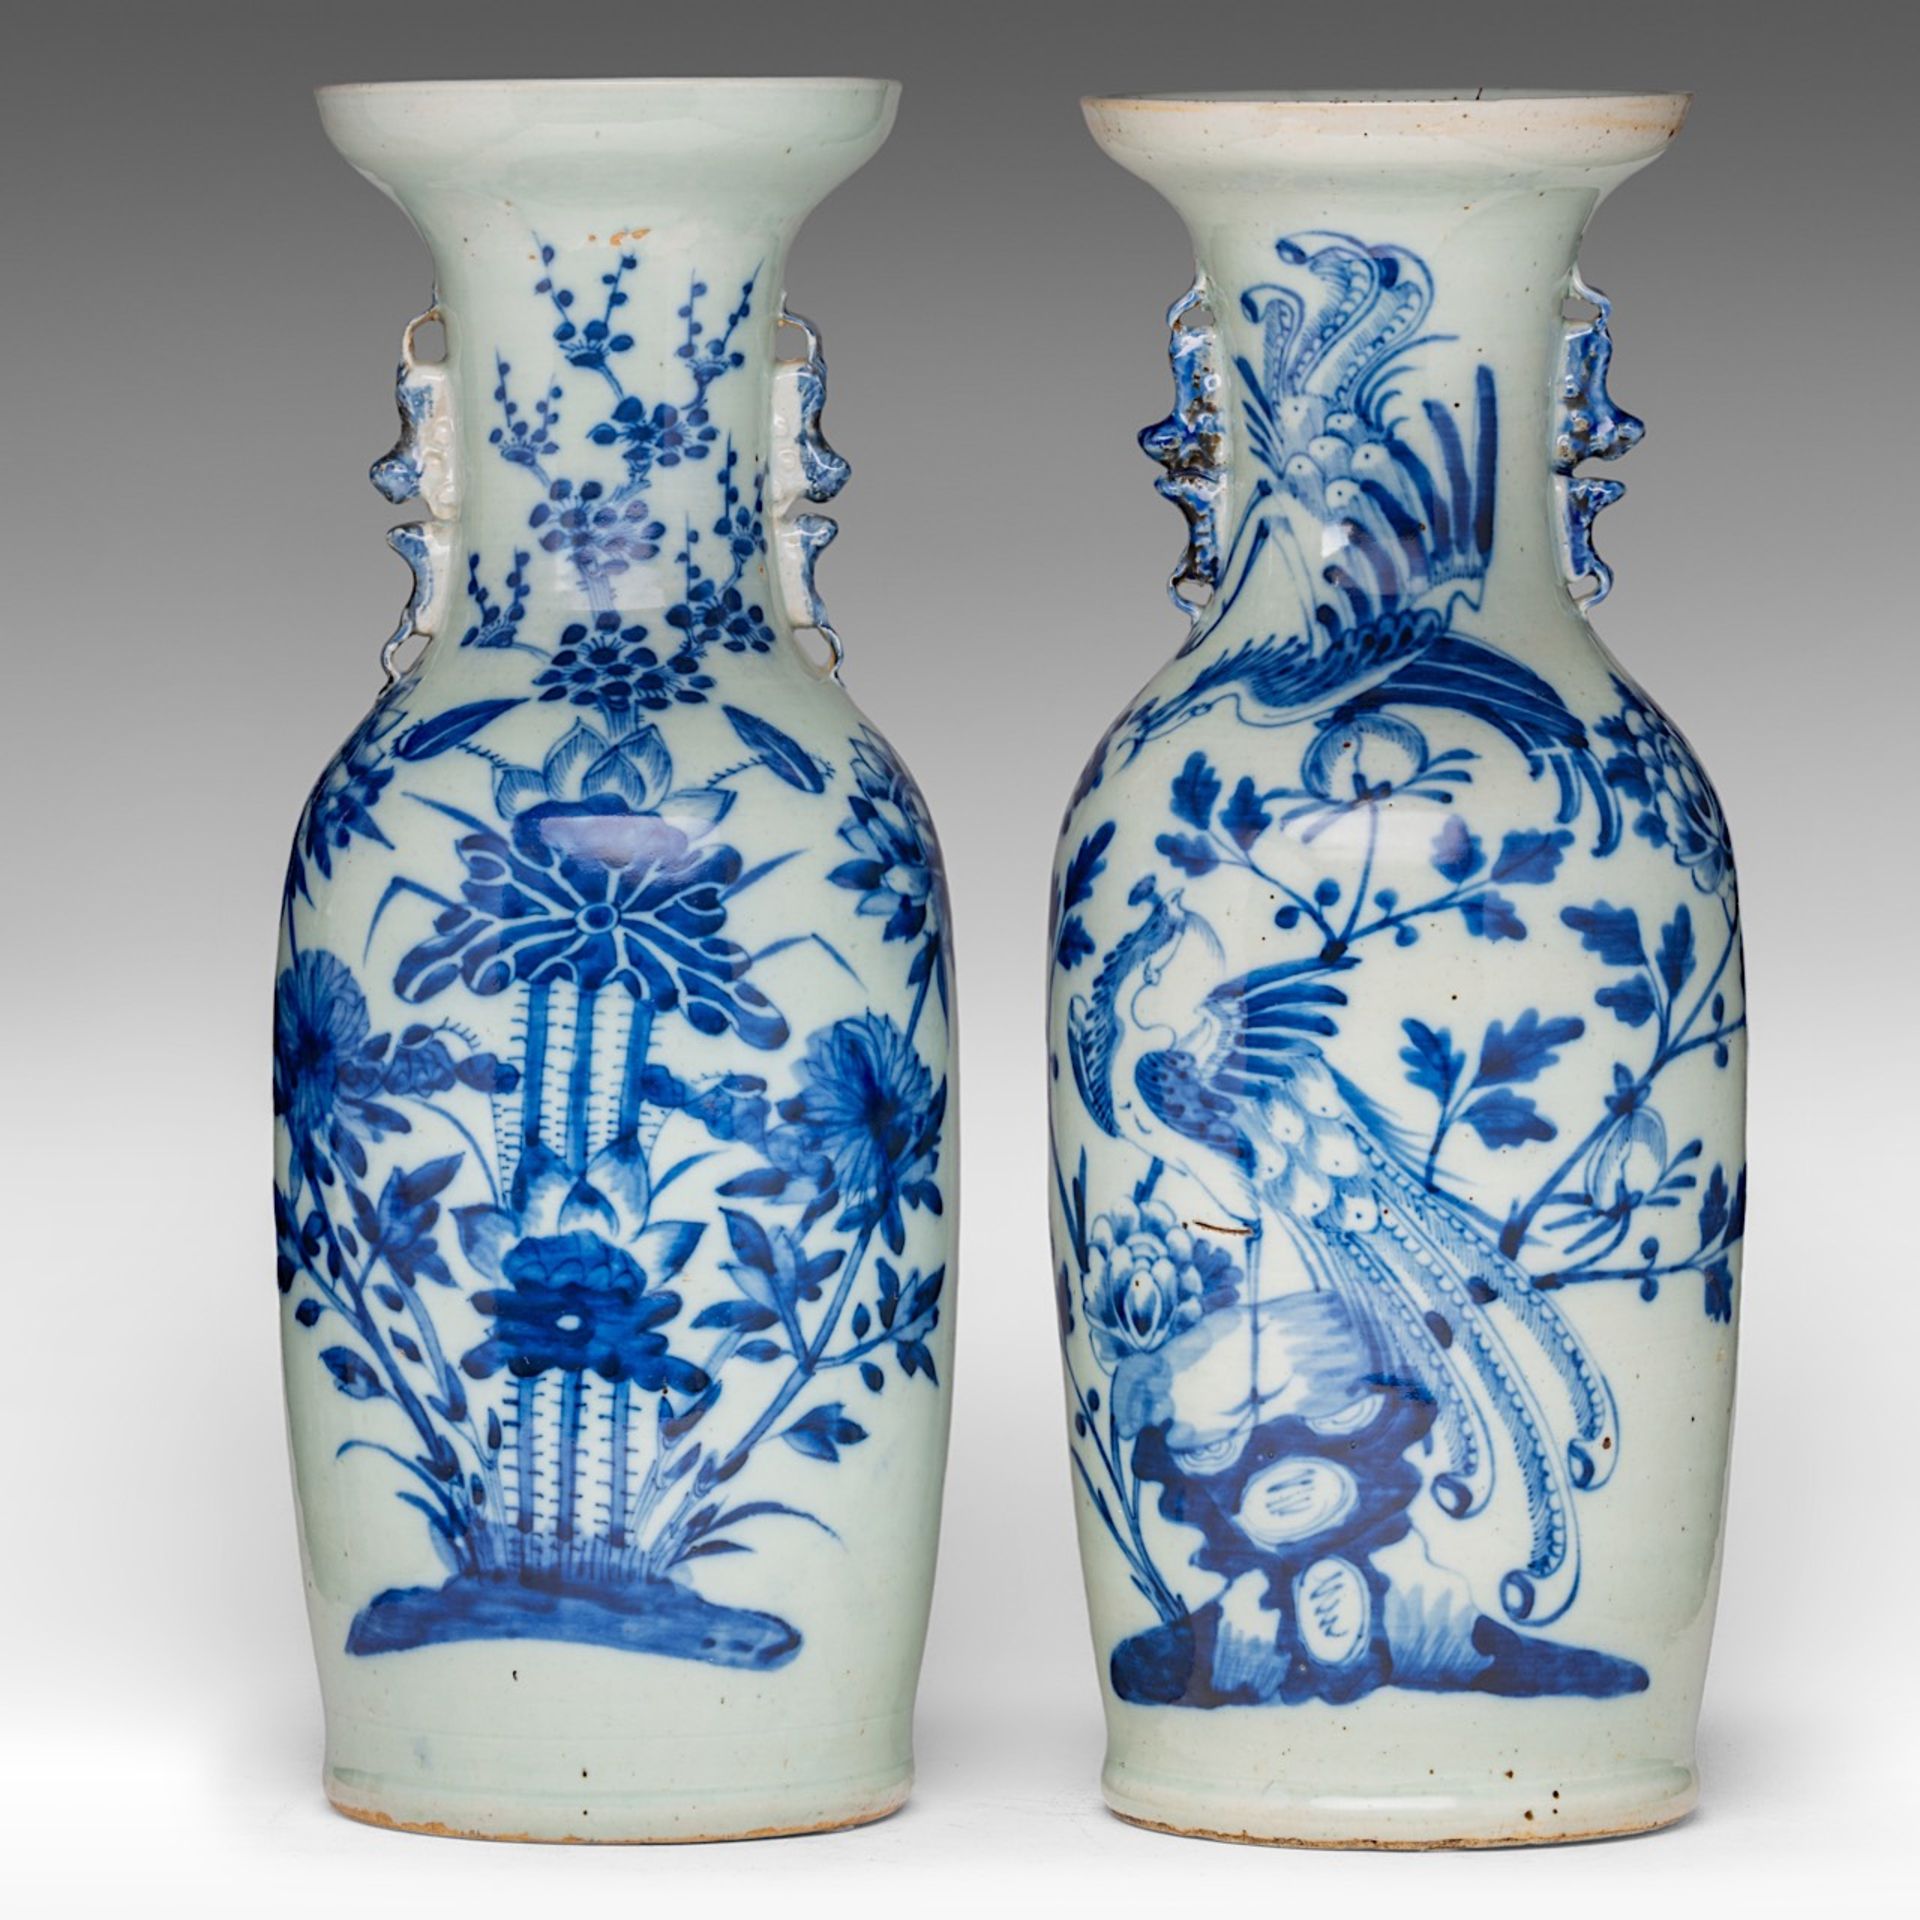 Four Chinese blue and white on celadon ground 'Flowers and birds' vases, late 19thC, H 57 - 58 cm - Image 2 of 13